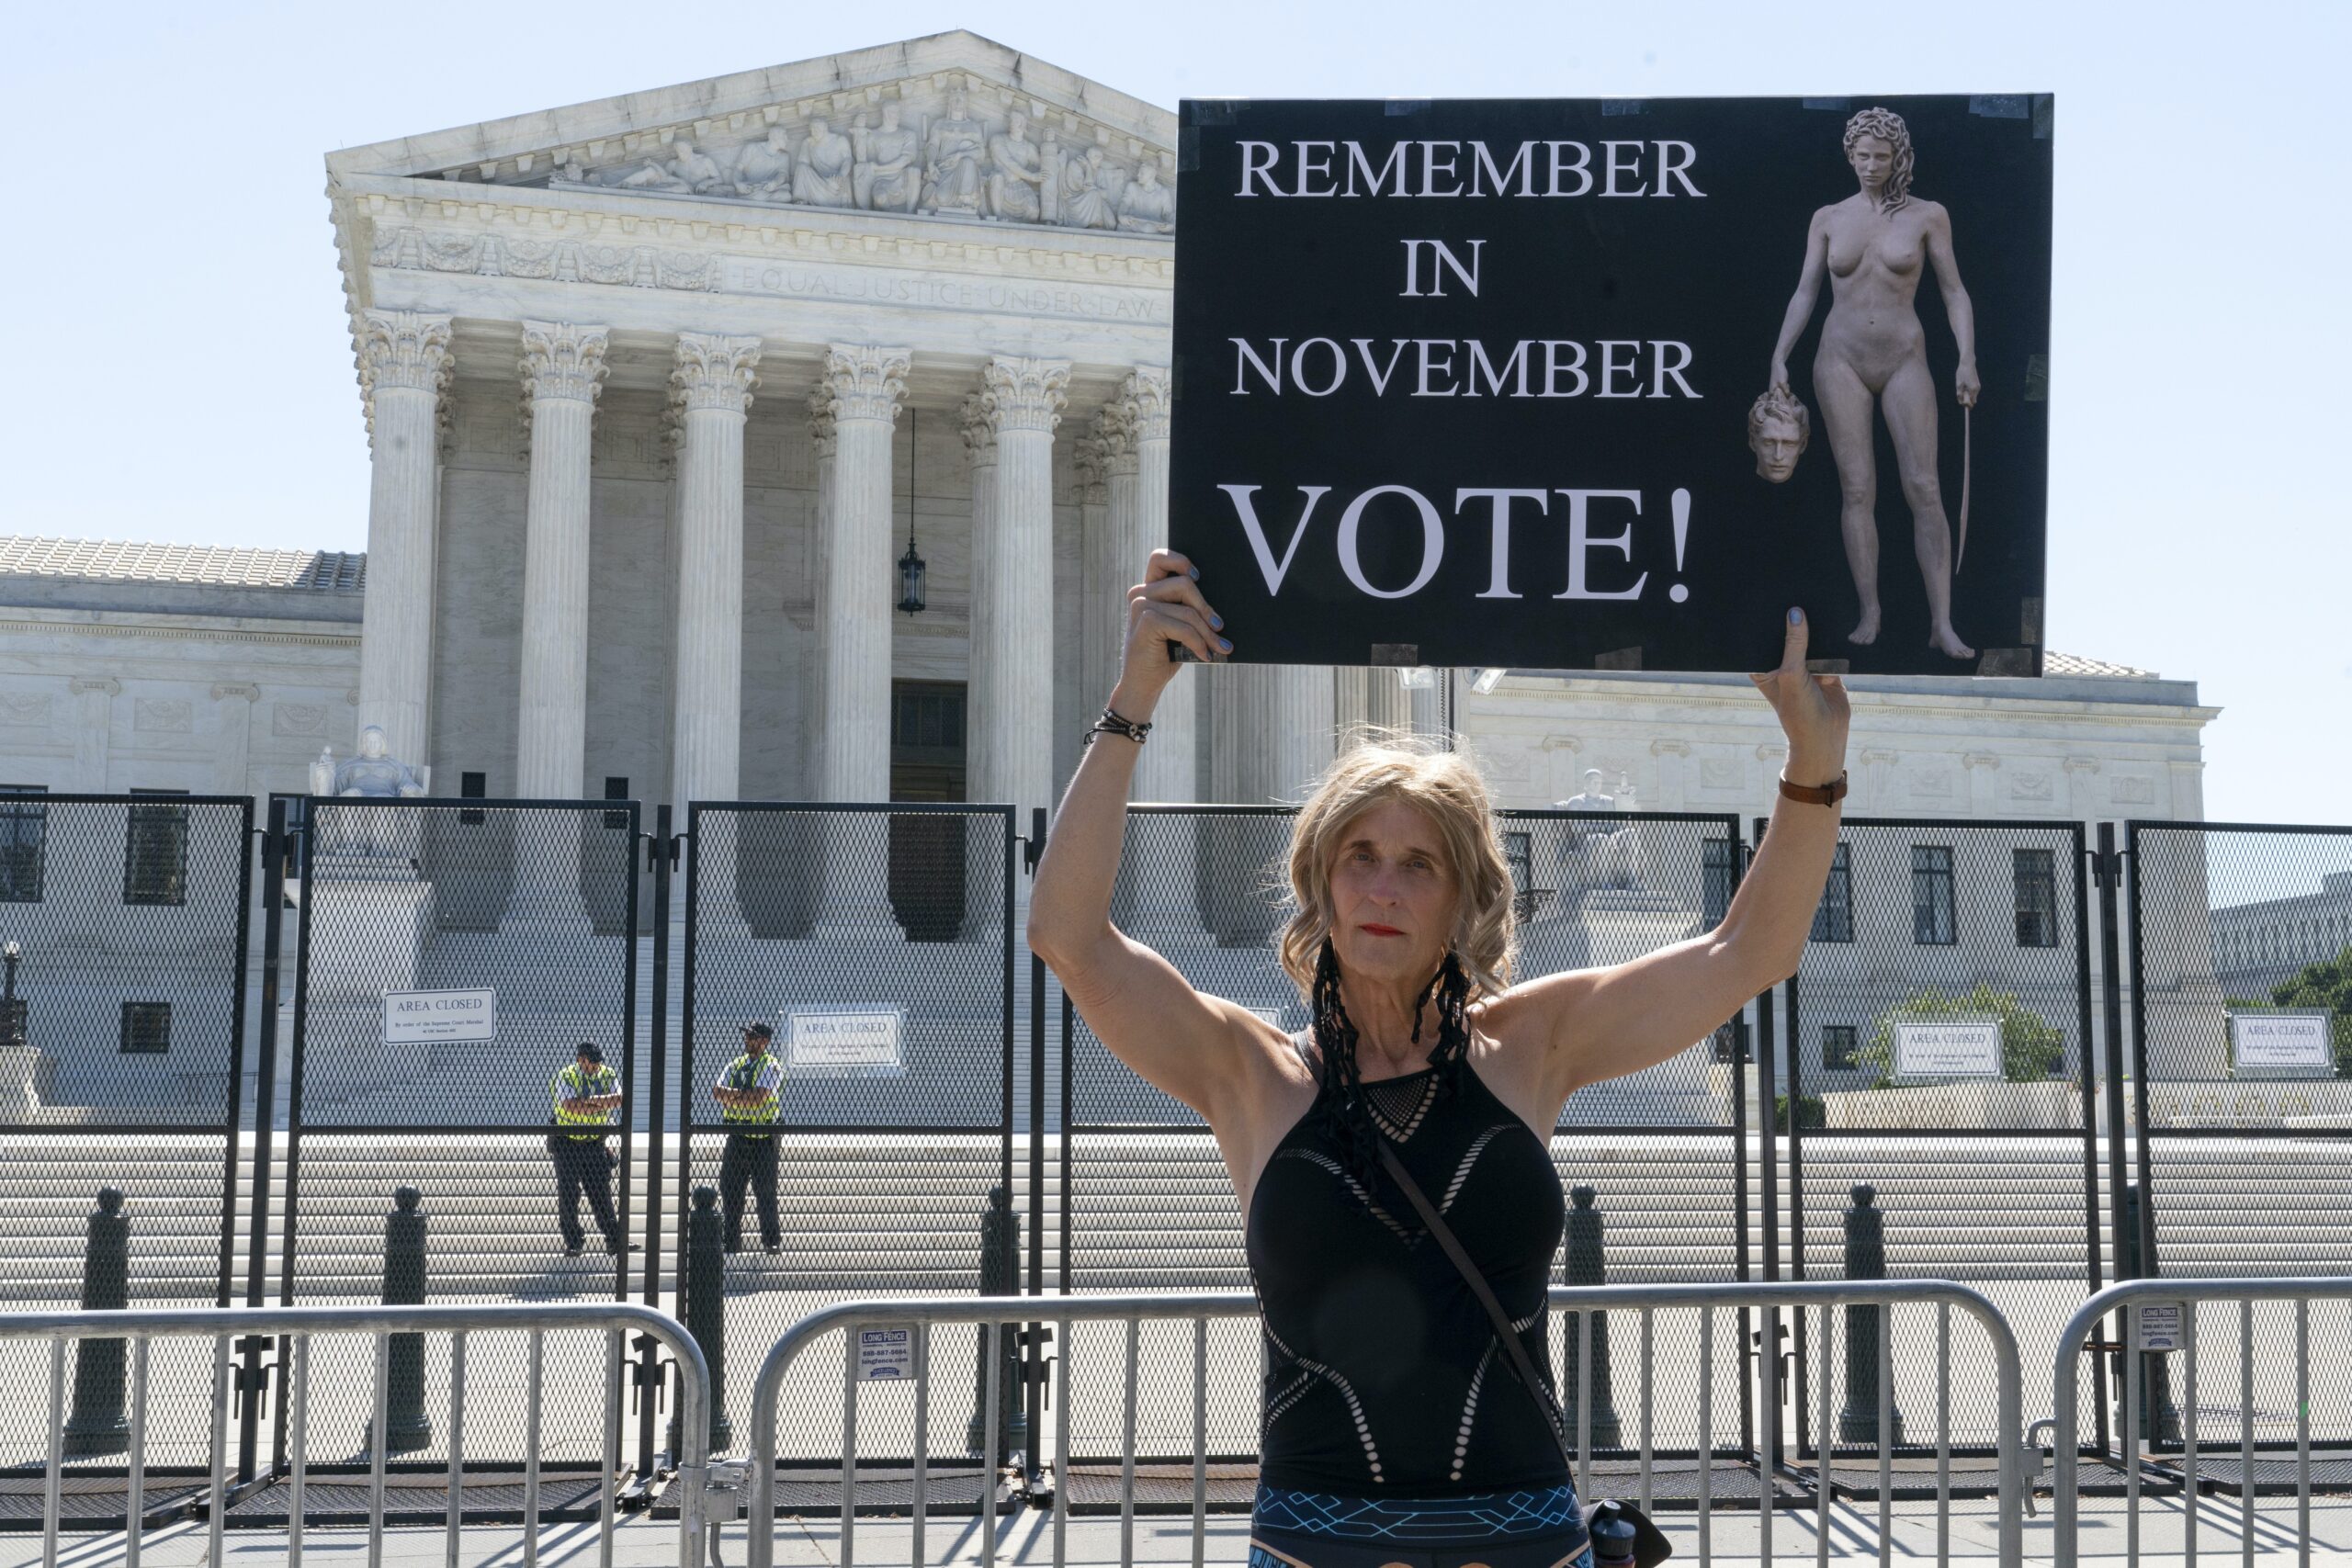 The right to abortion is among the top issues on the ballot in several states. (AP Photo/Jacquelyn Martin, File)